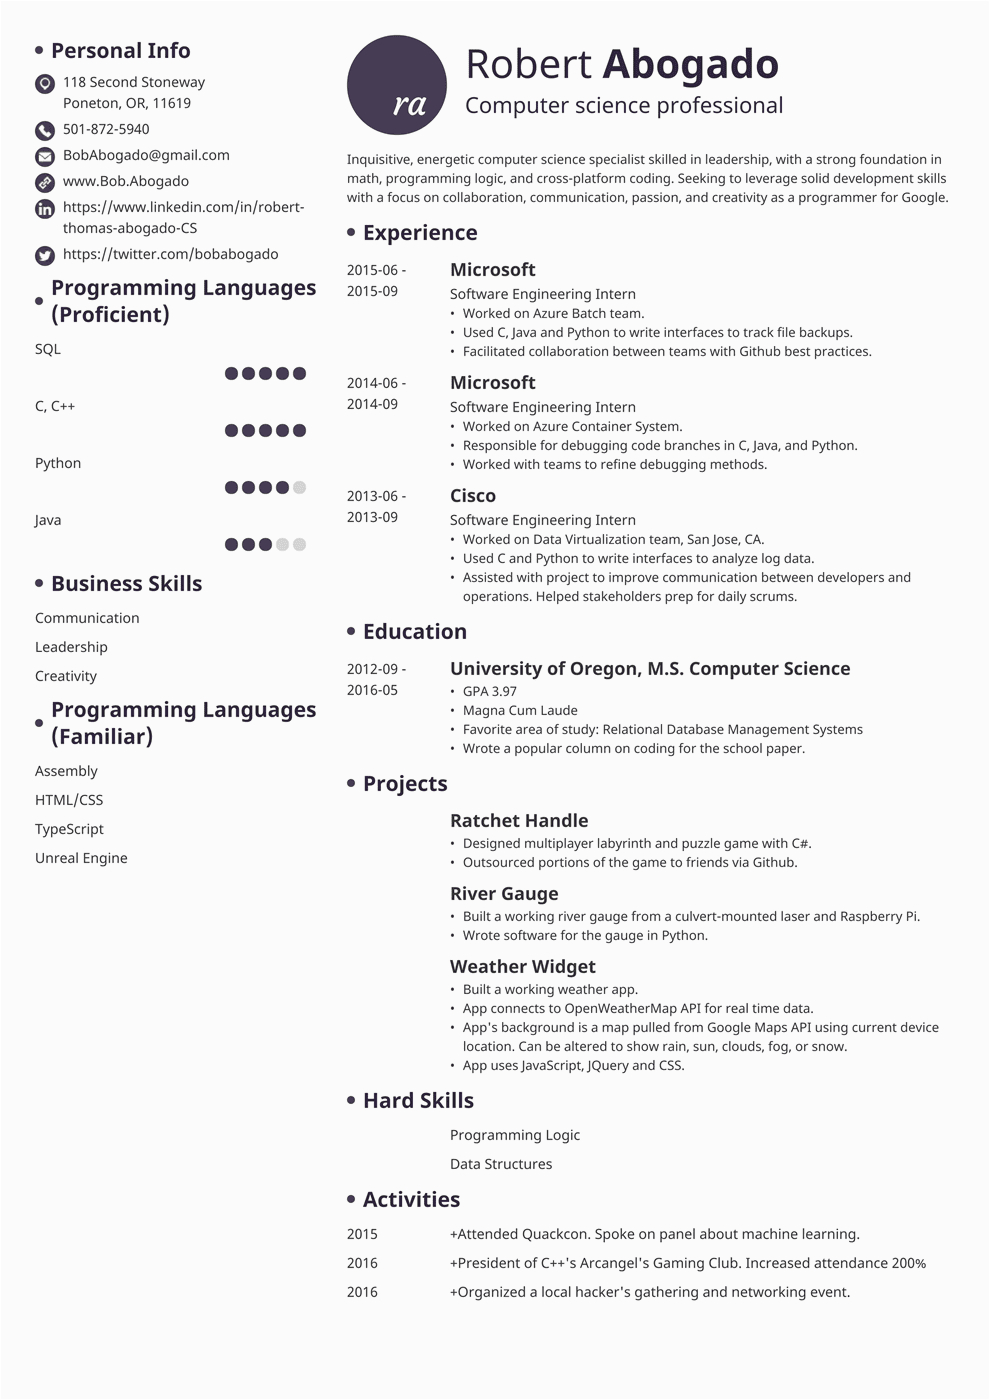 Resume Samples for Computer Science Engineers Resume Puter Science Engineer